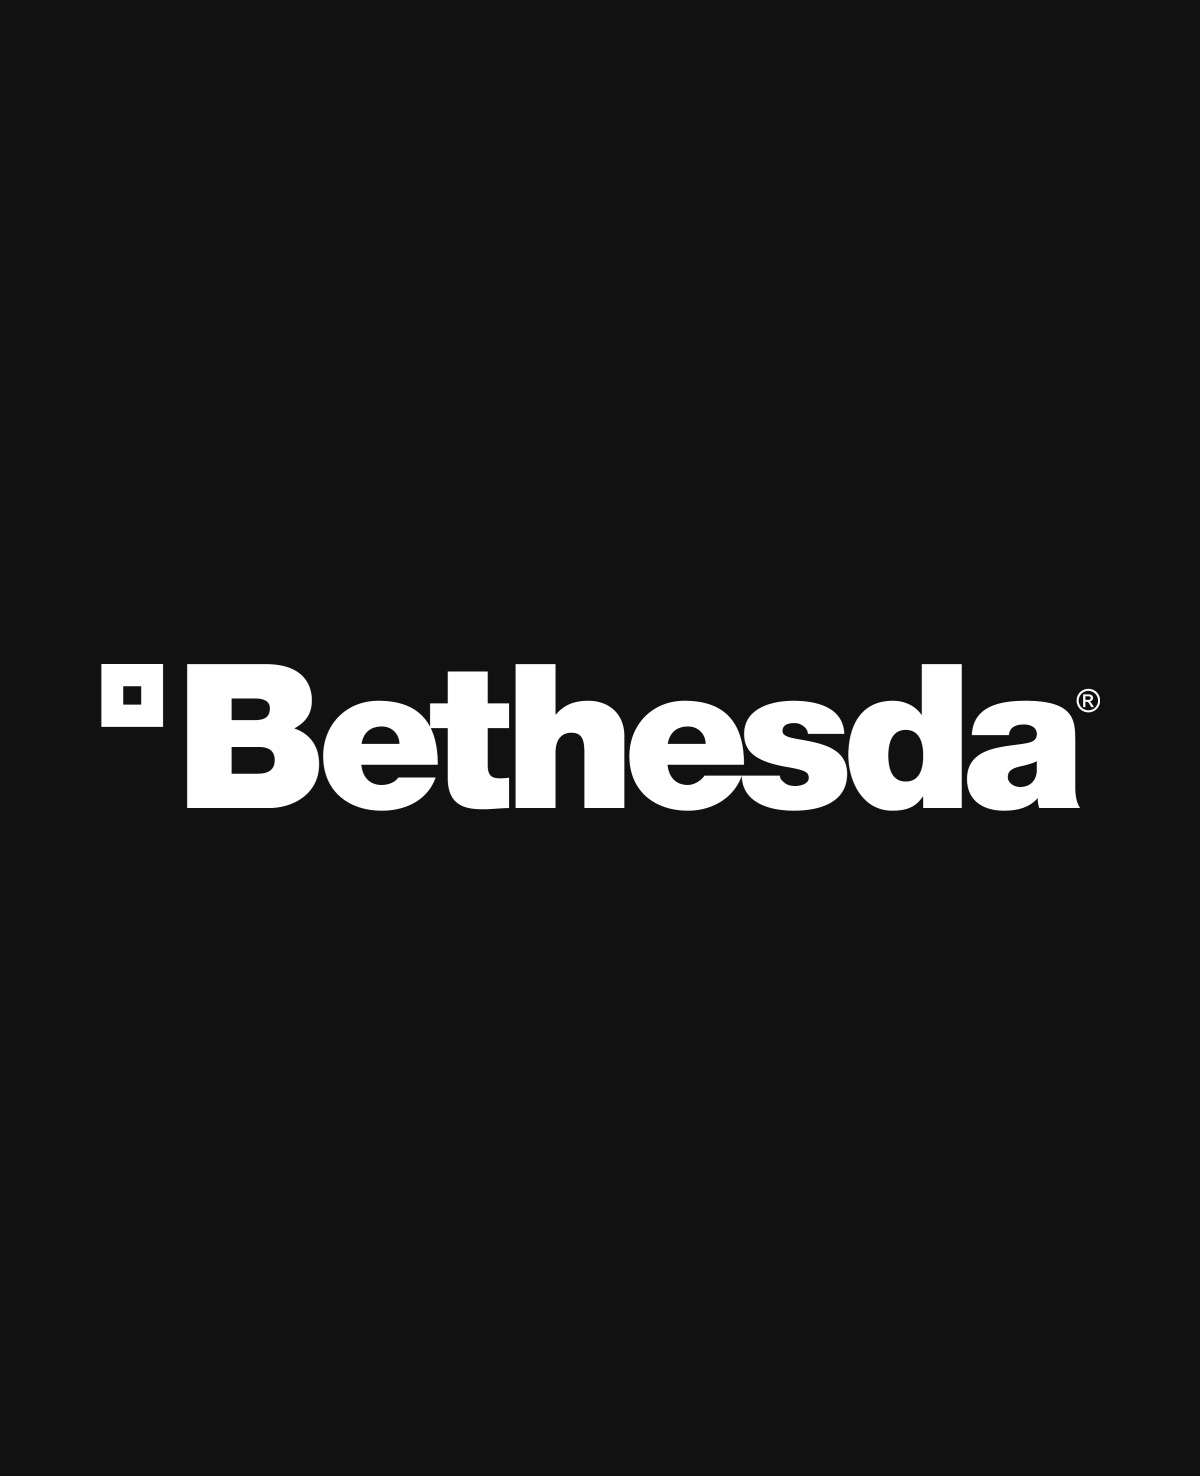 Bethesda Adds Free Games to Steam as Launcher Migration Begins